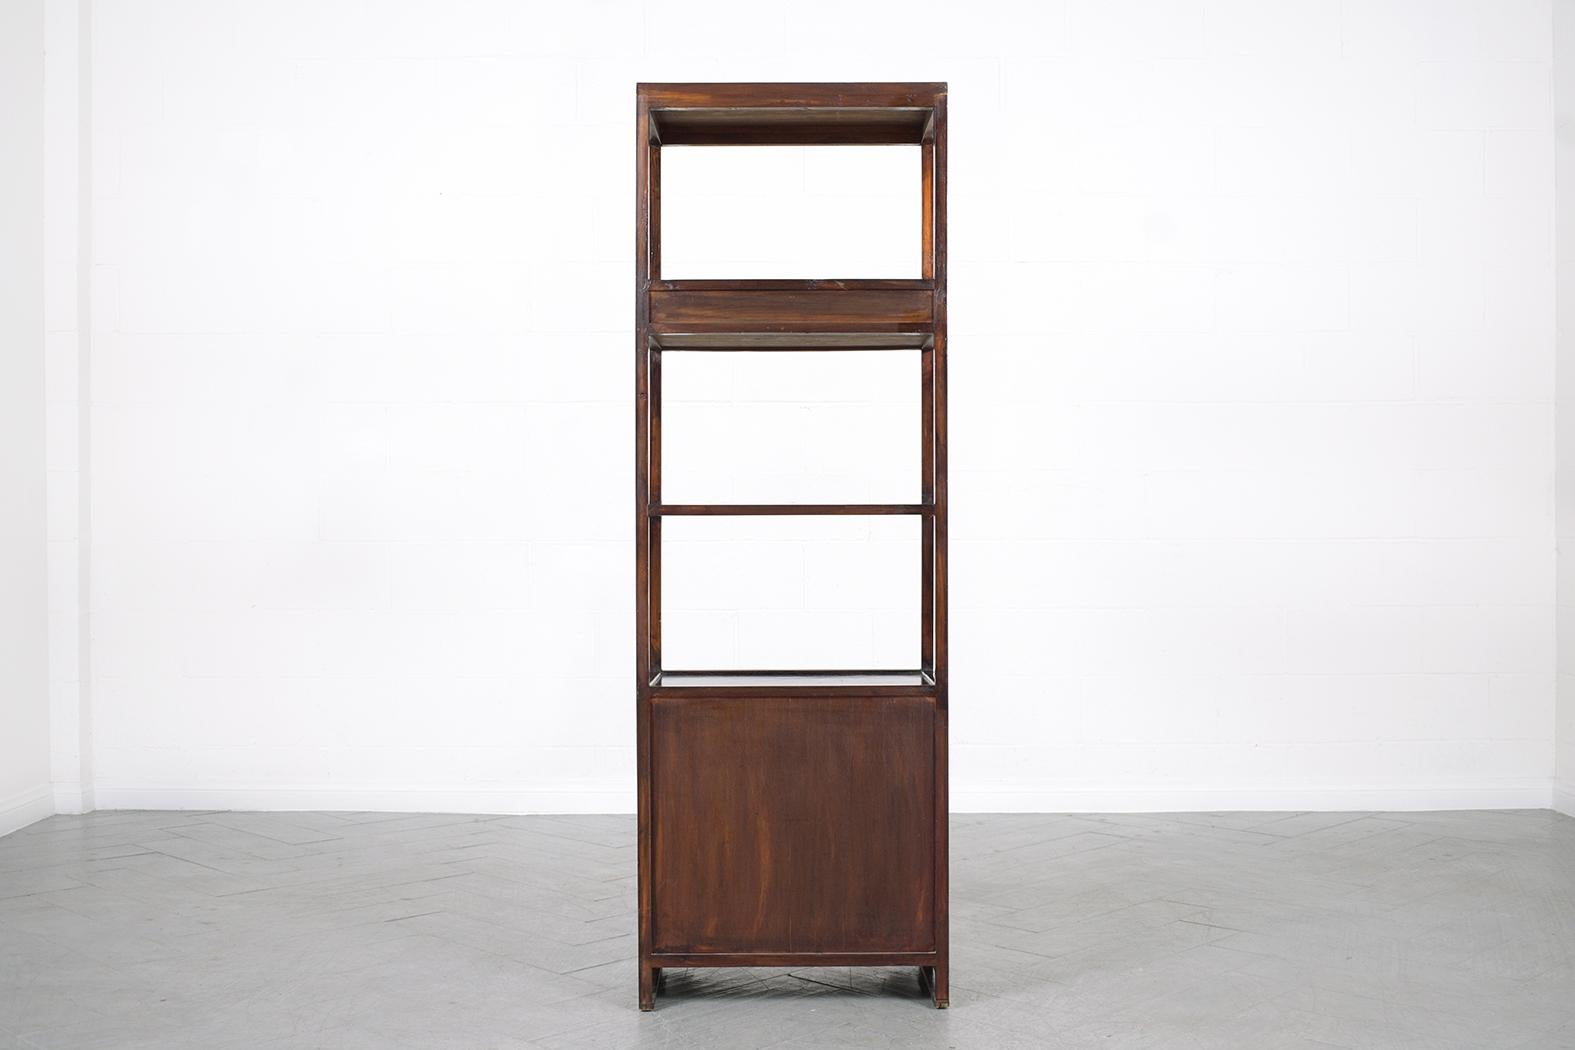 Vintage Chinese Elm Wood Bookcase: A Statement of Timeless Craftsmanship 6